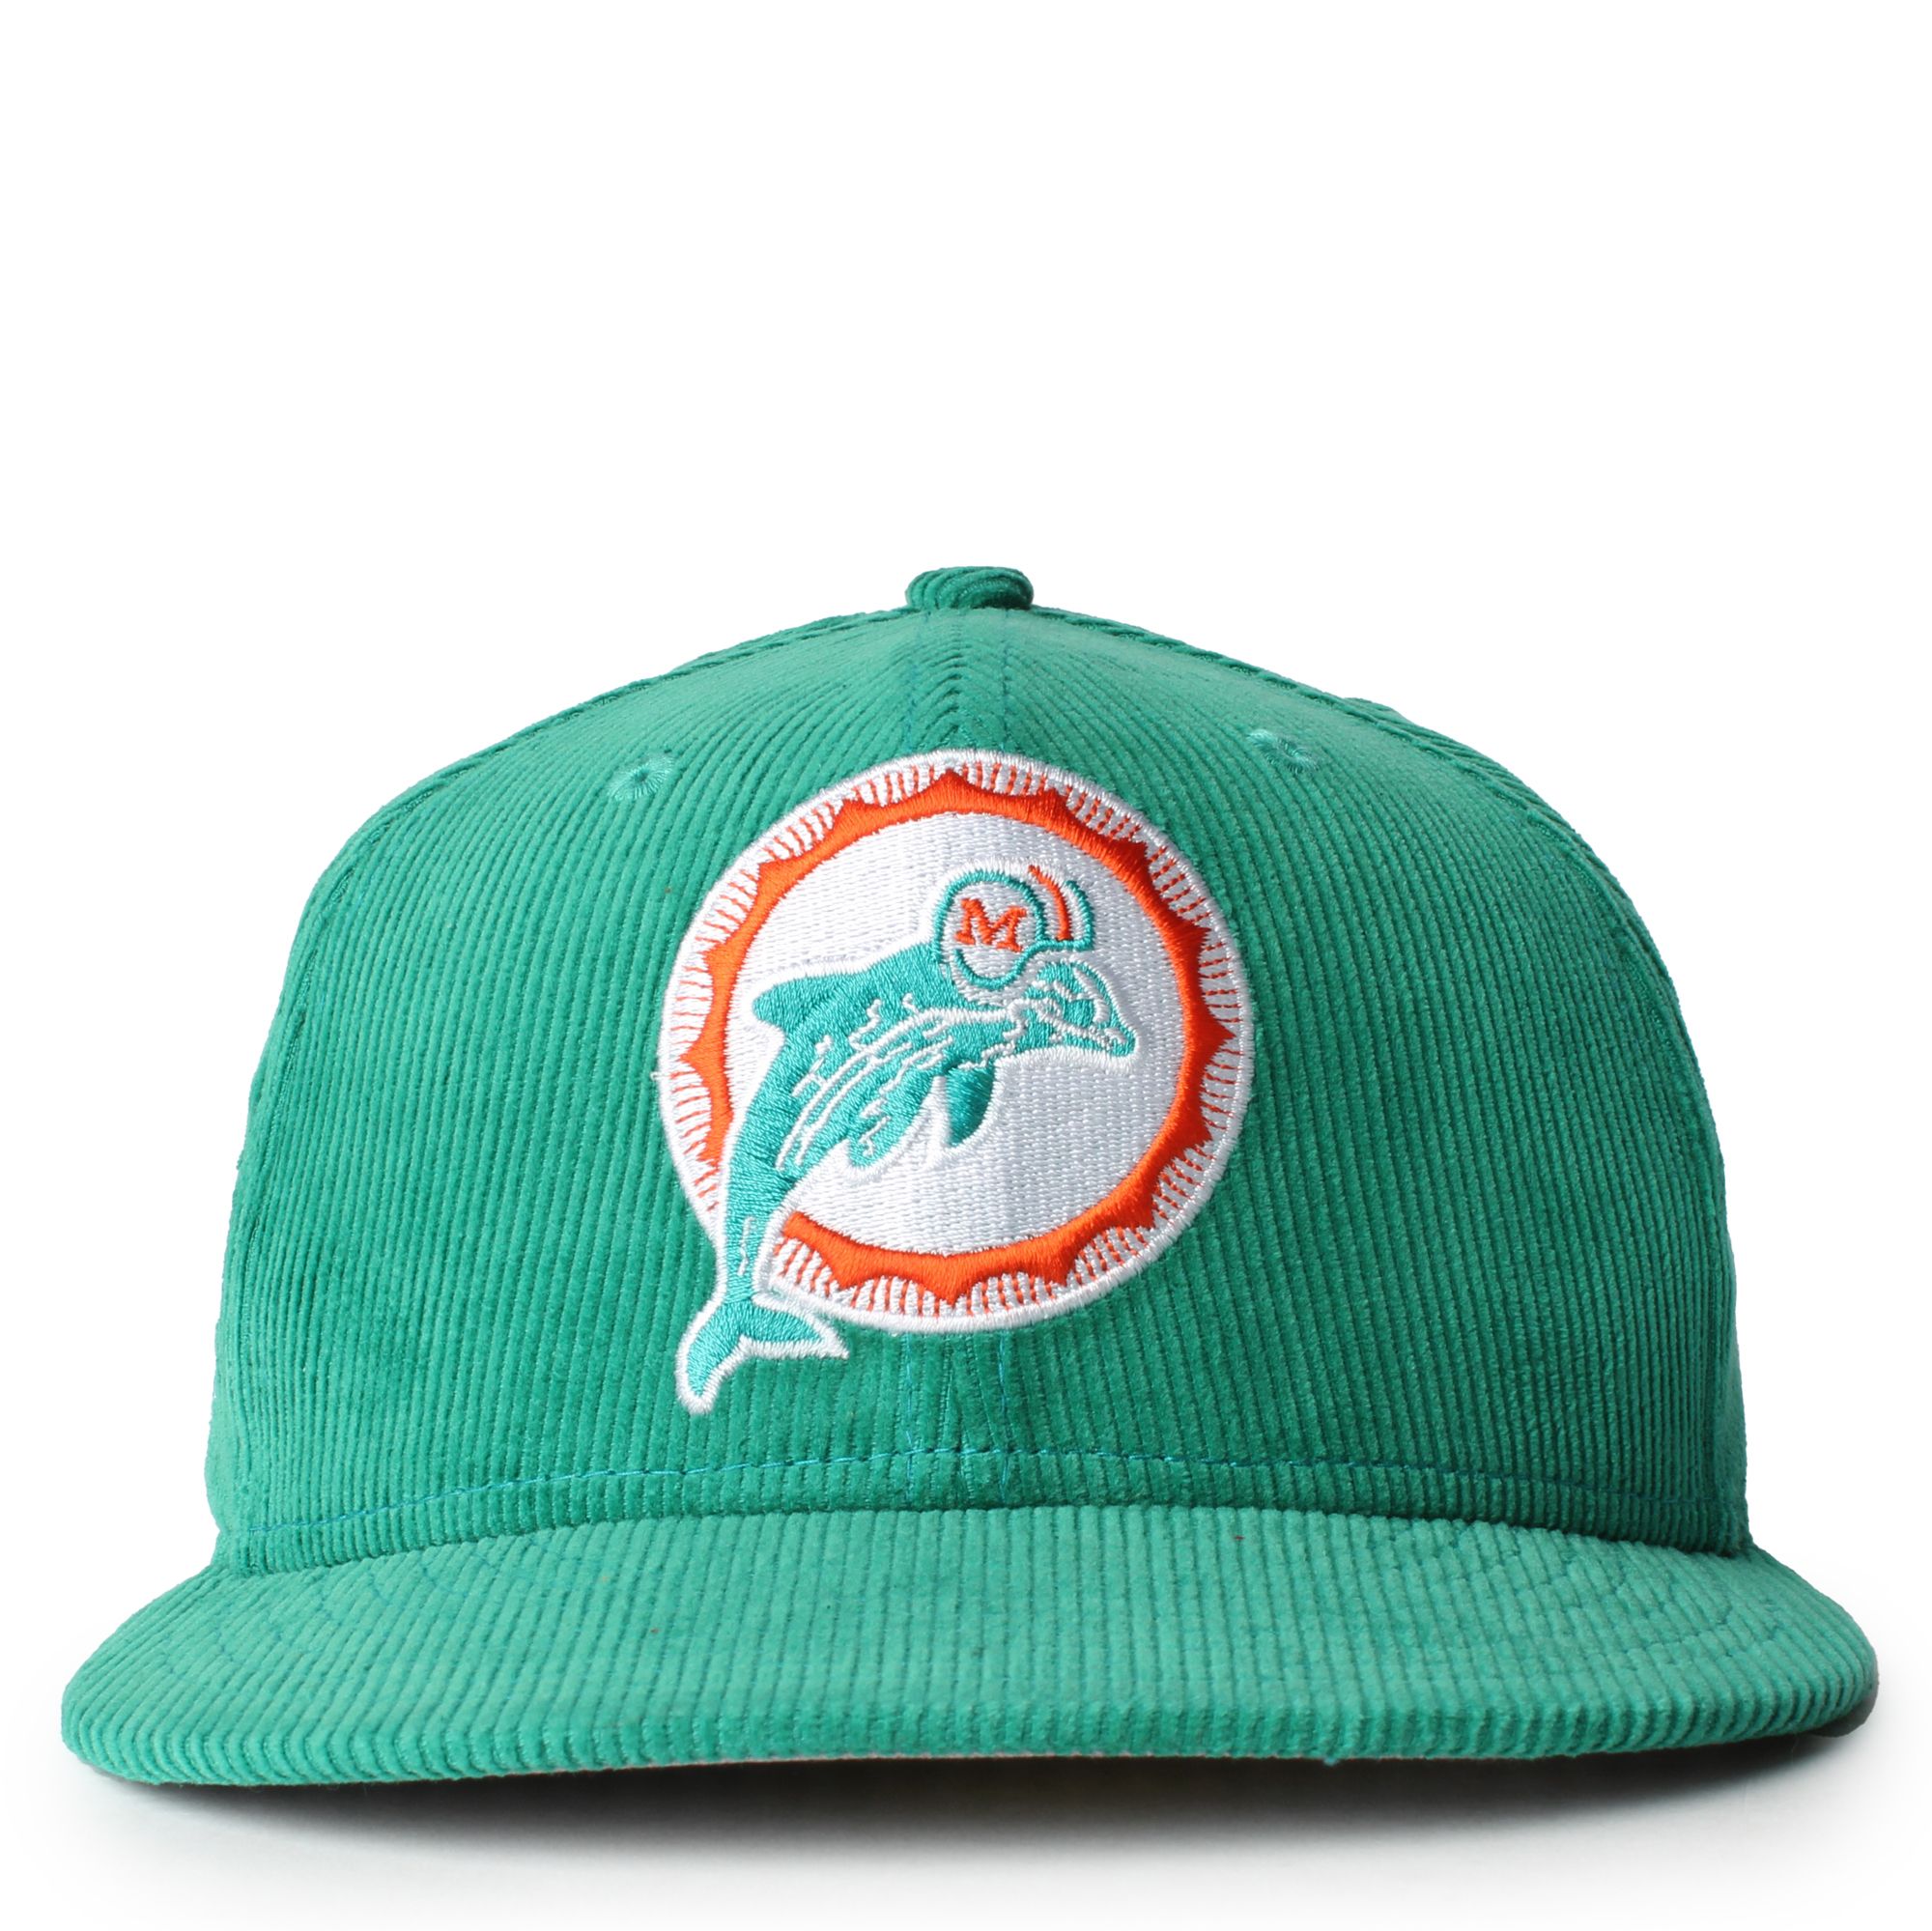 mitchell and ness miami dolphins hat